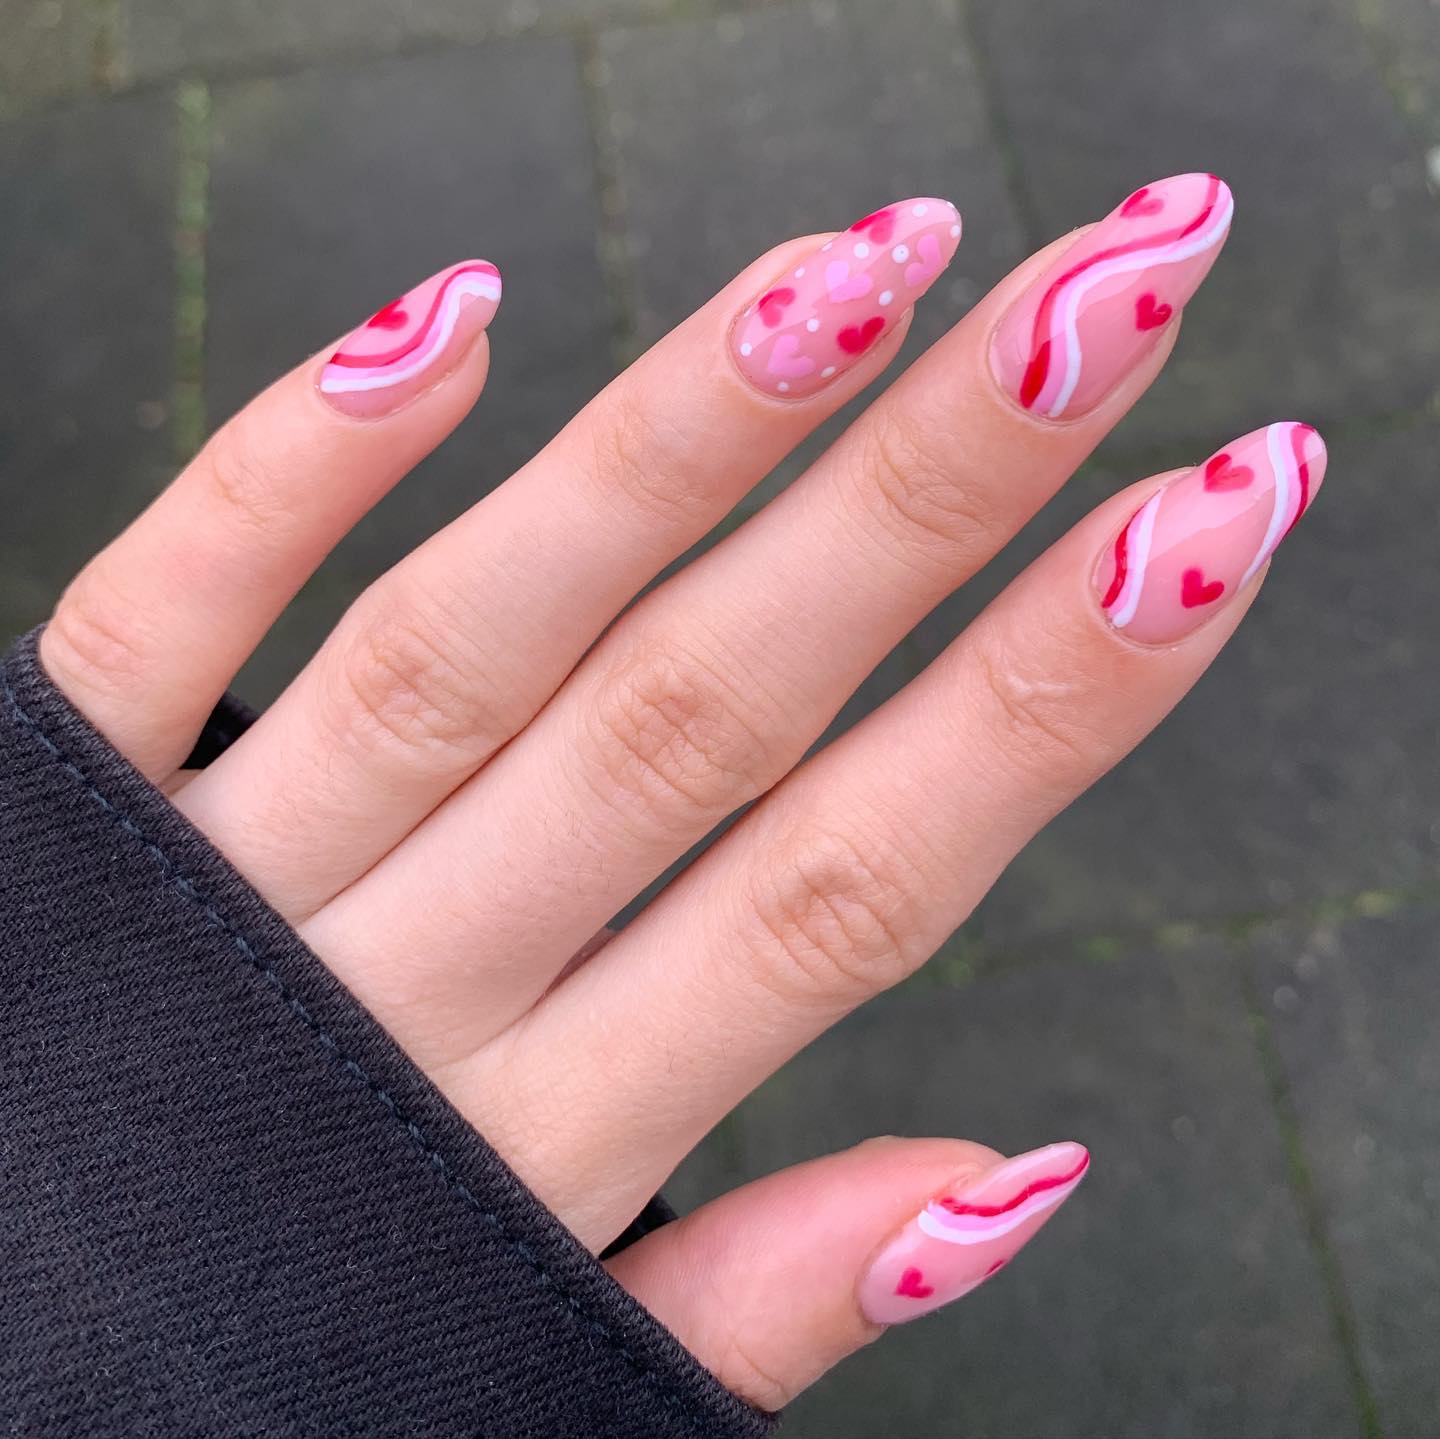 pink and red nails